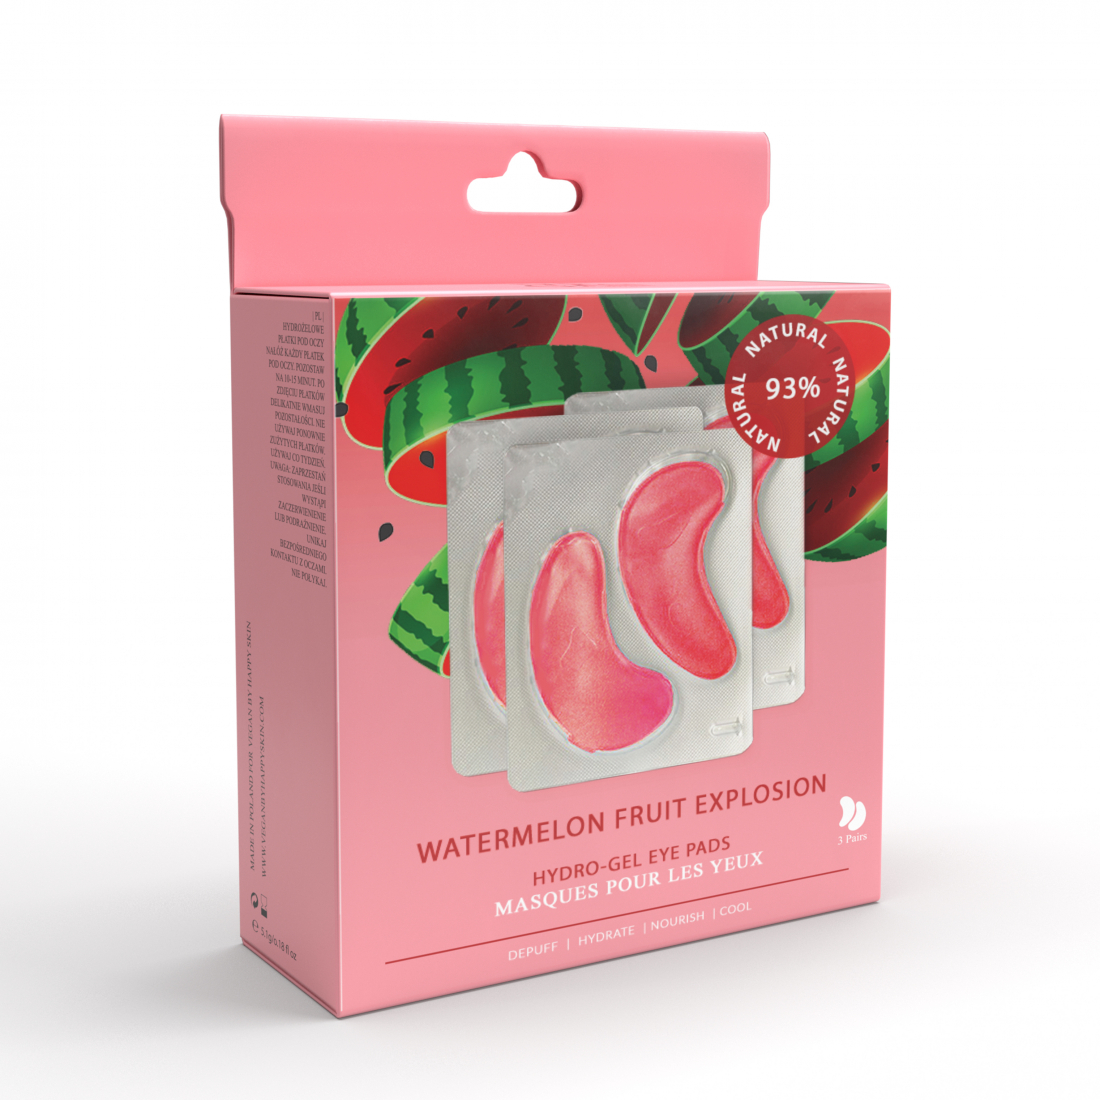 'Watermelon Fruit Explosion Hydro' Eye Pads - 3 Pieces